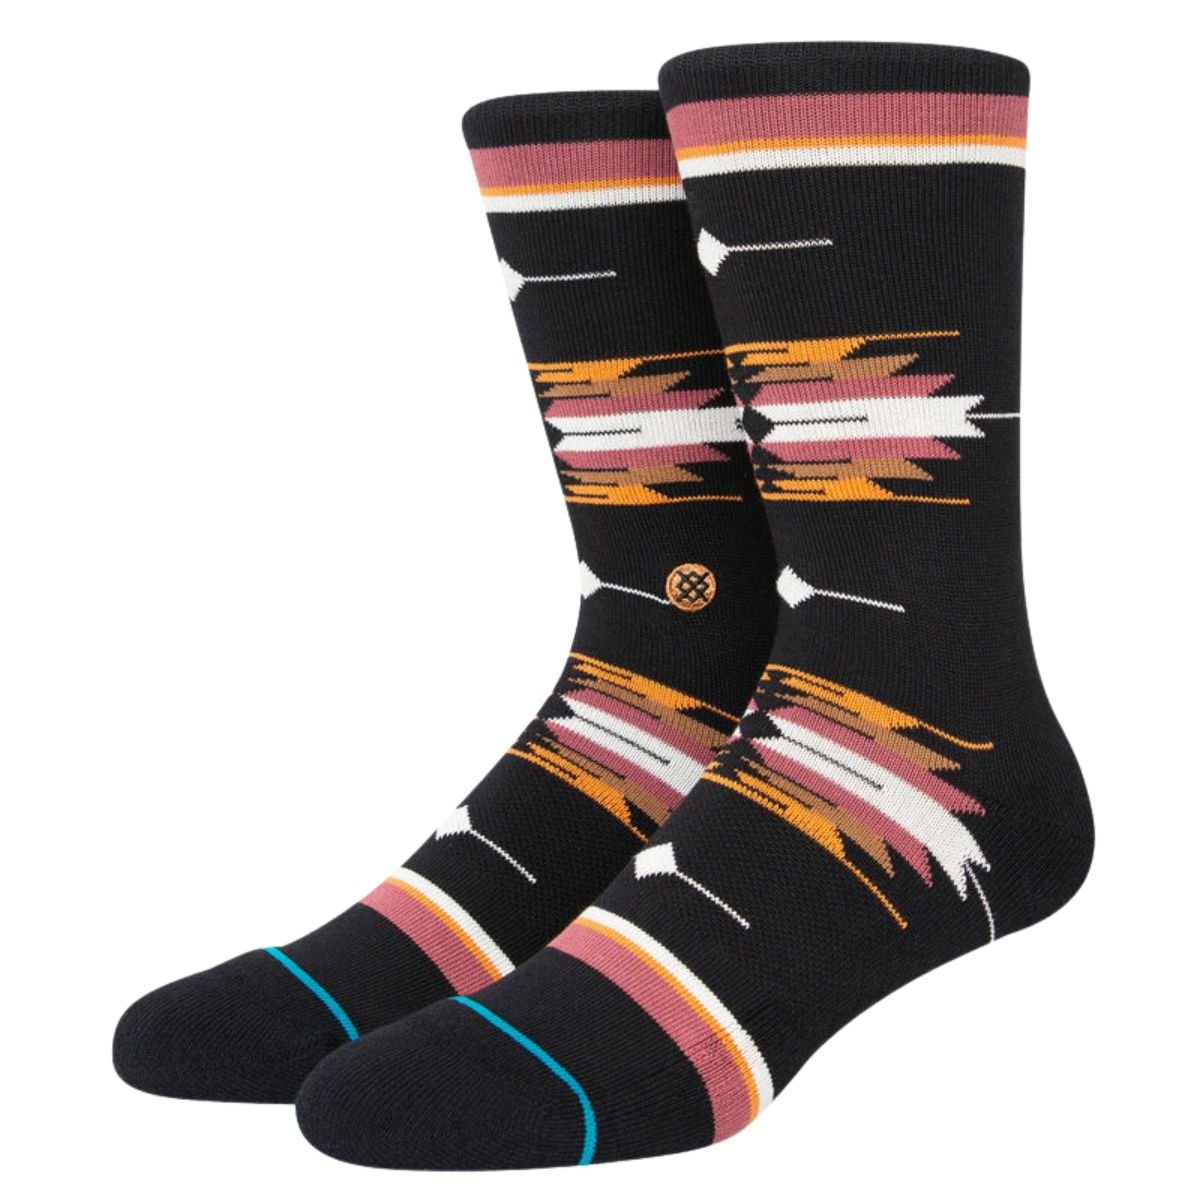 Stance Cloaked Crew Socks in Washed Black - BoardCo